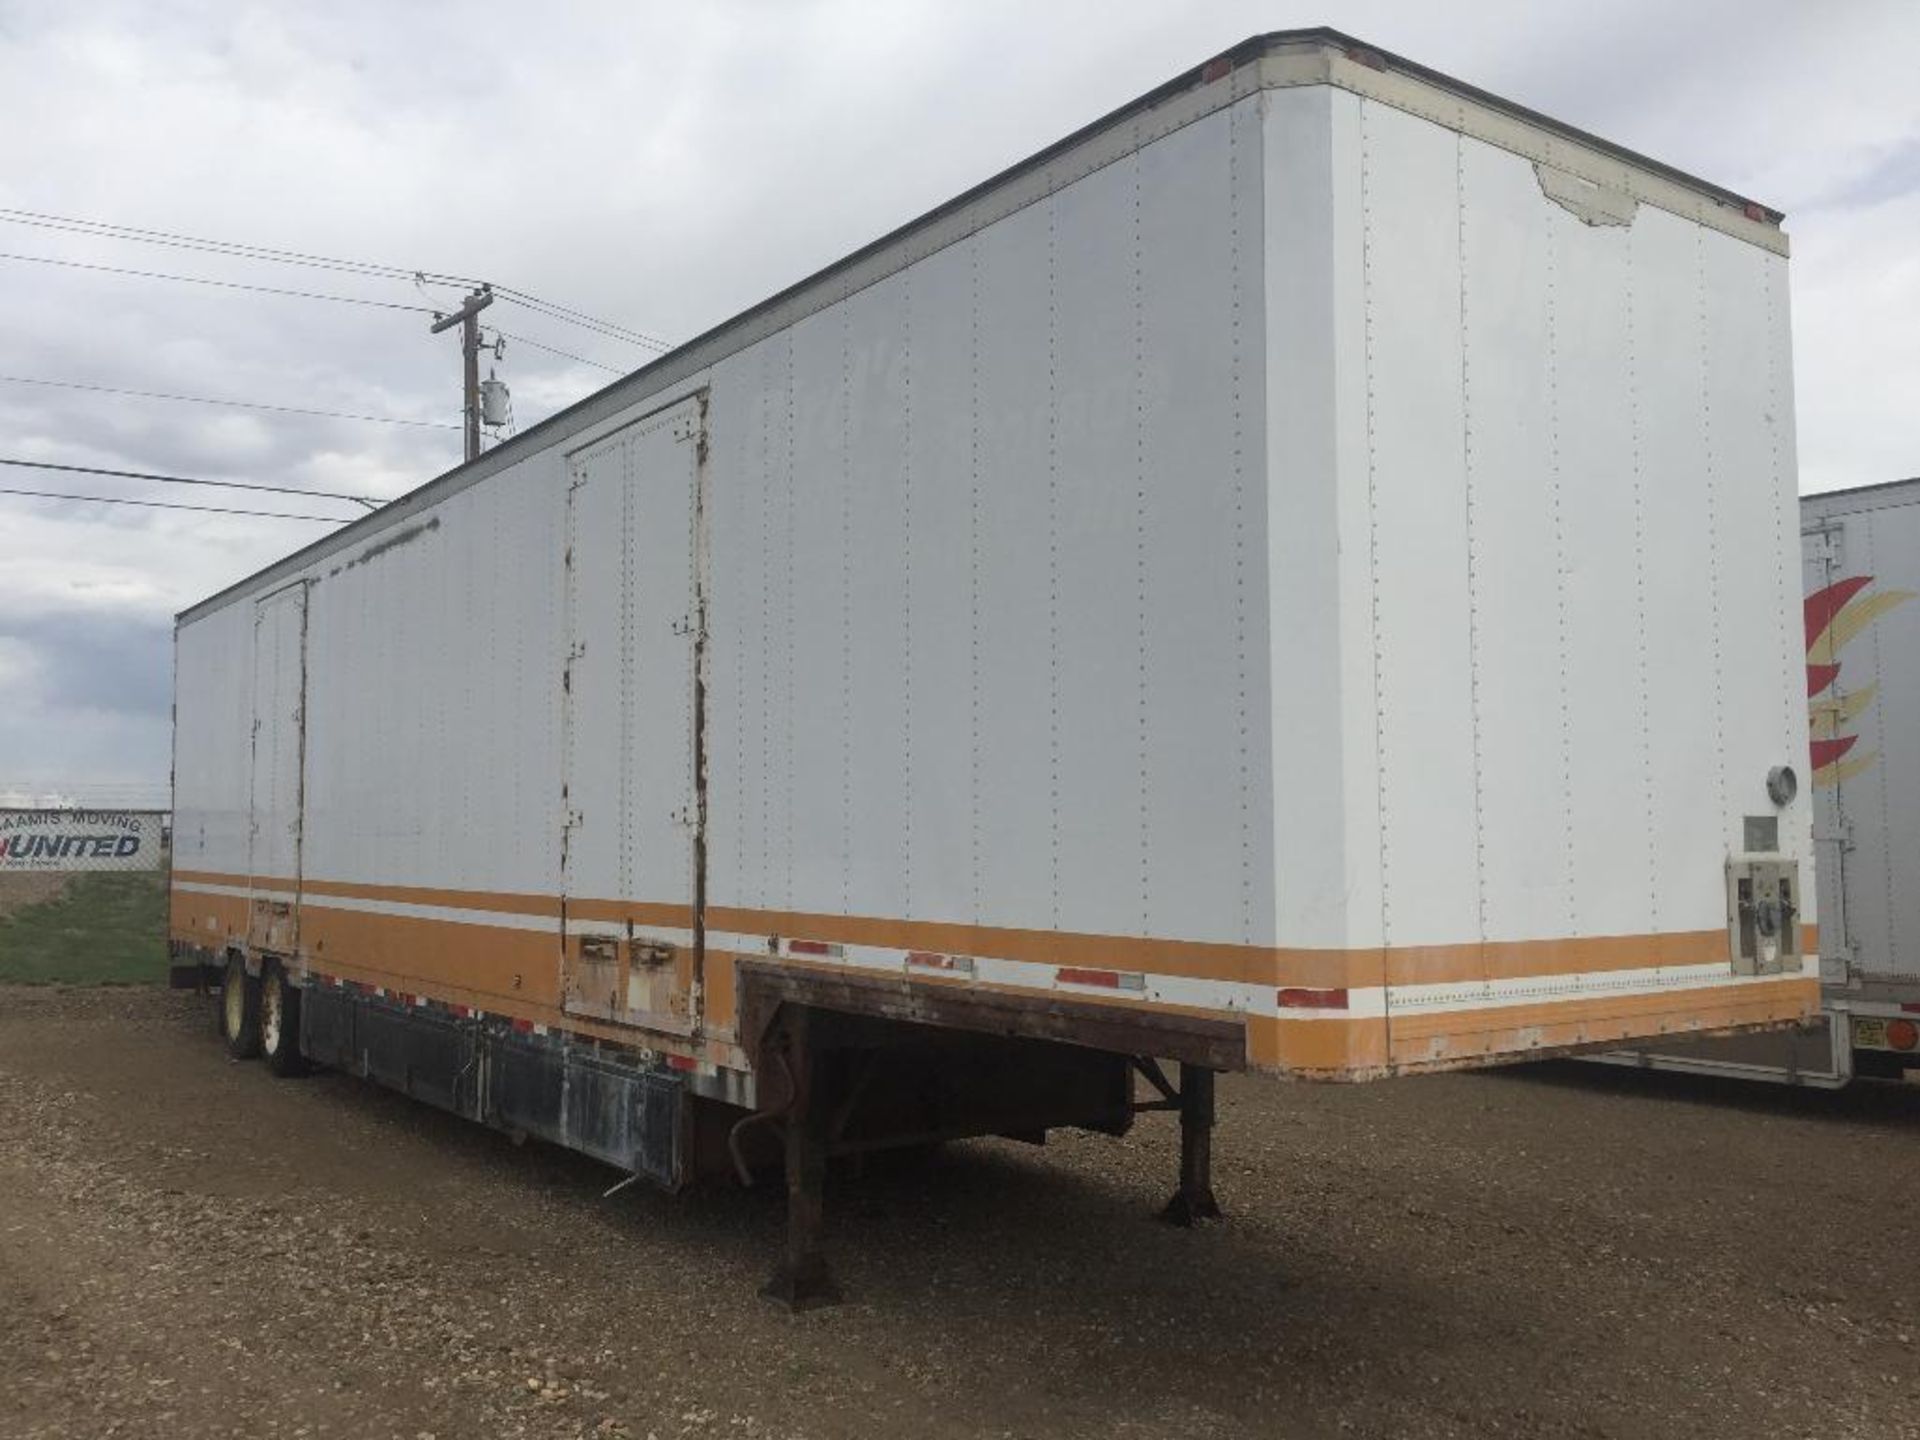 1989 KENTUCKY LOW DECK MOVING TRAILER. USED FOR STORAGE ON SITE FOR PAST 2 YEARS.